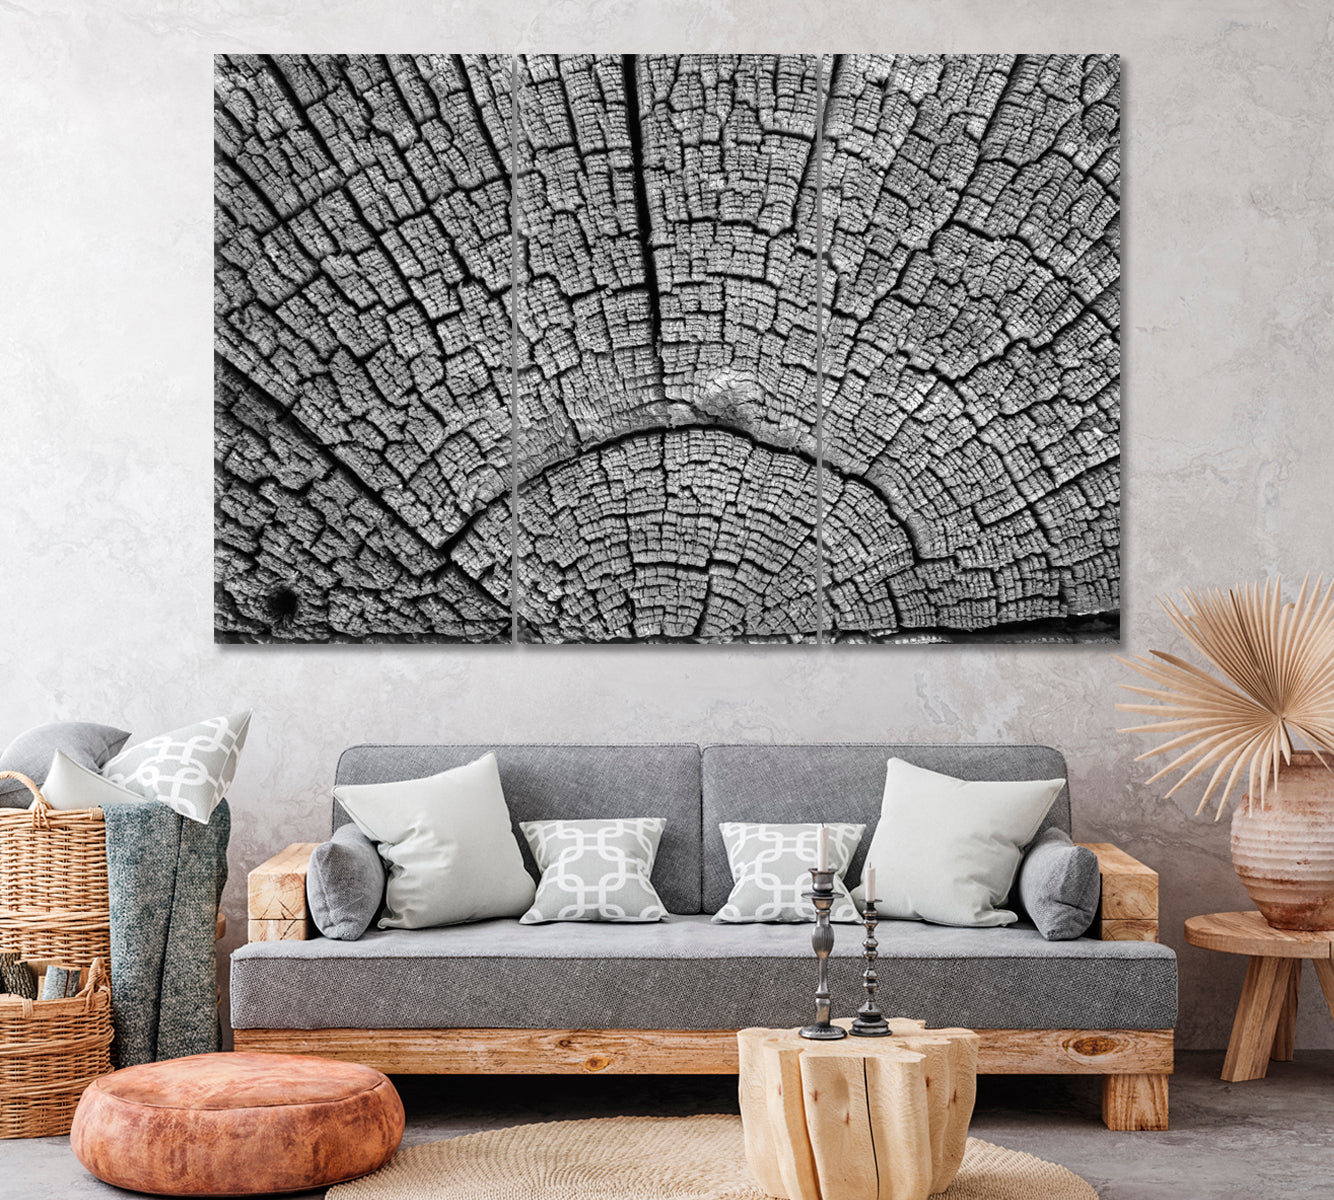 Cracked Old Tree Canvas Print ArtLexy 3 Panels 36"x24" inches 